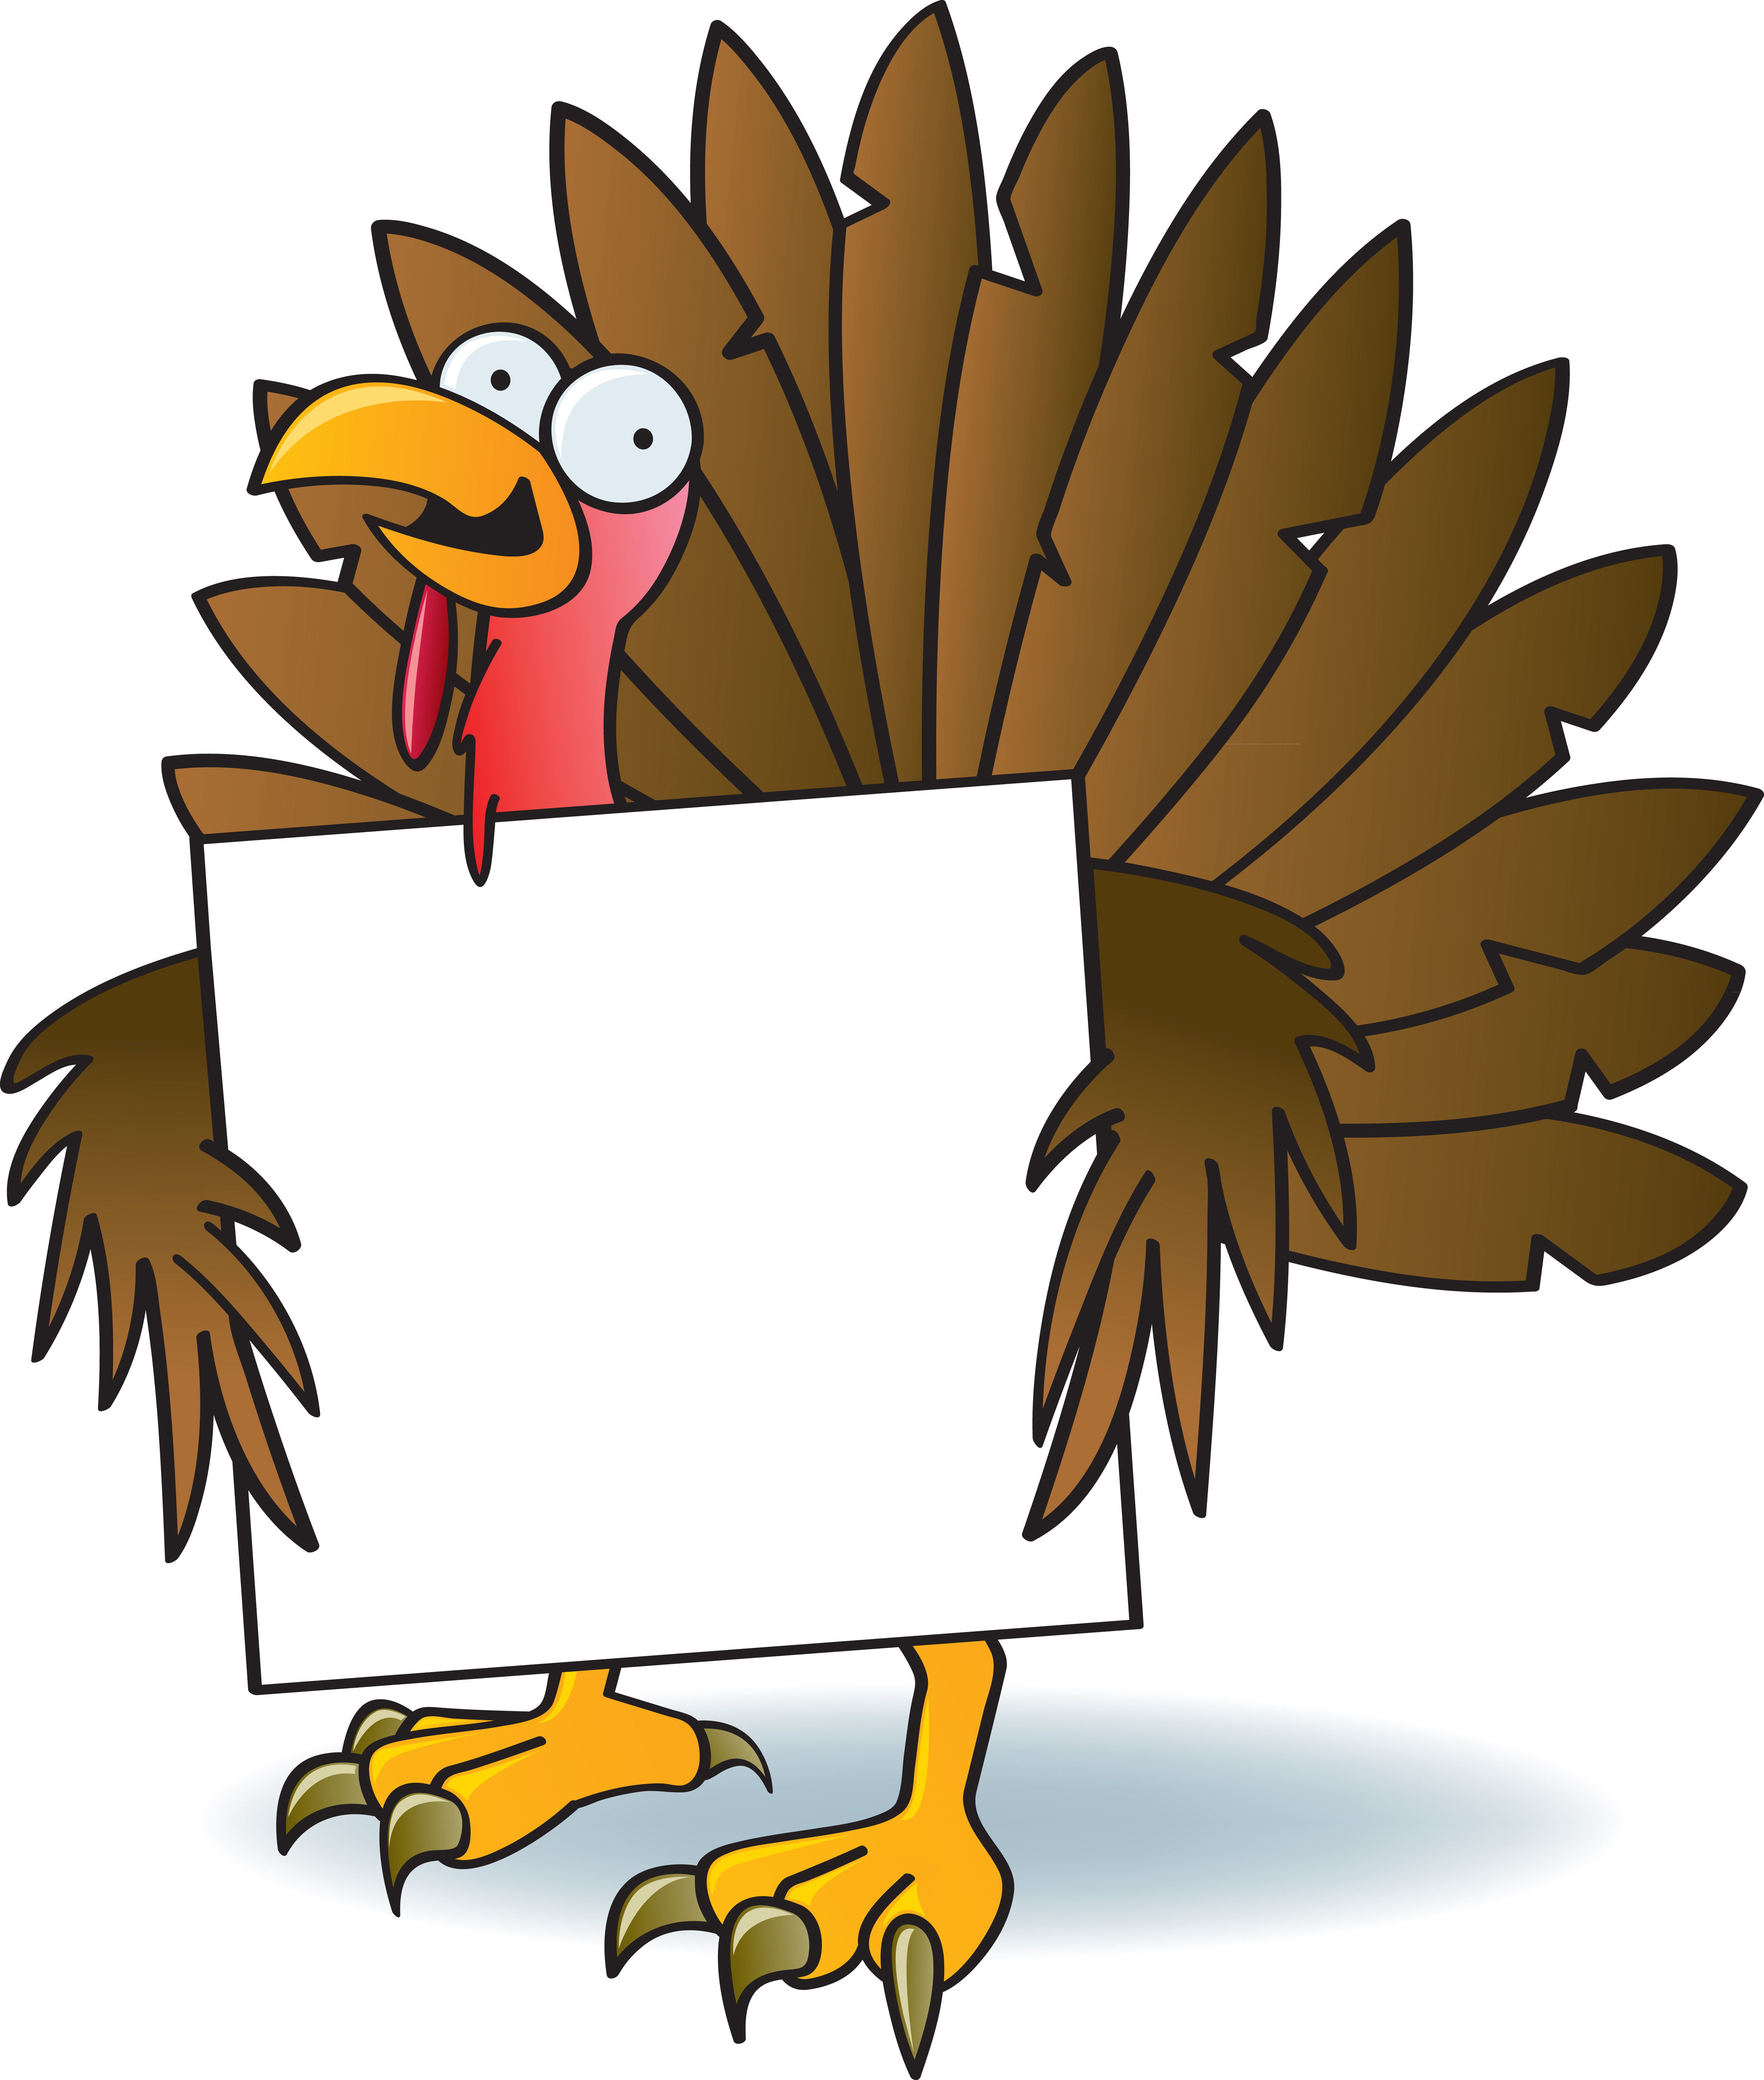 Turkey Cartoon Pictures For Thanksgiving